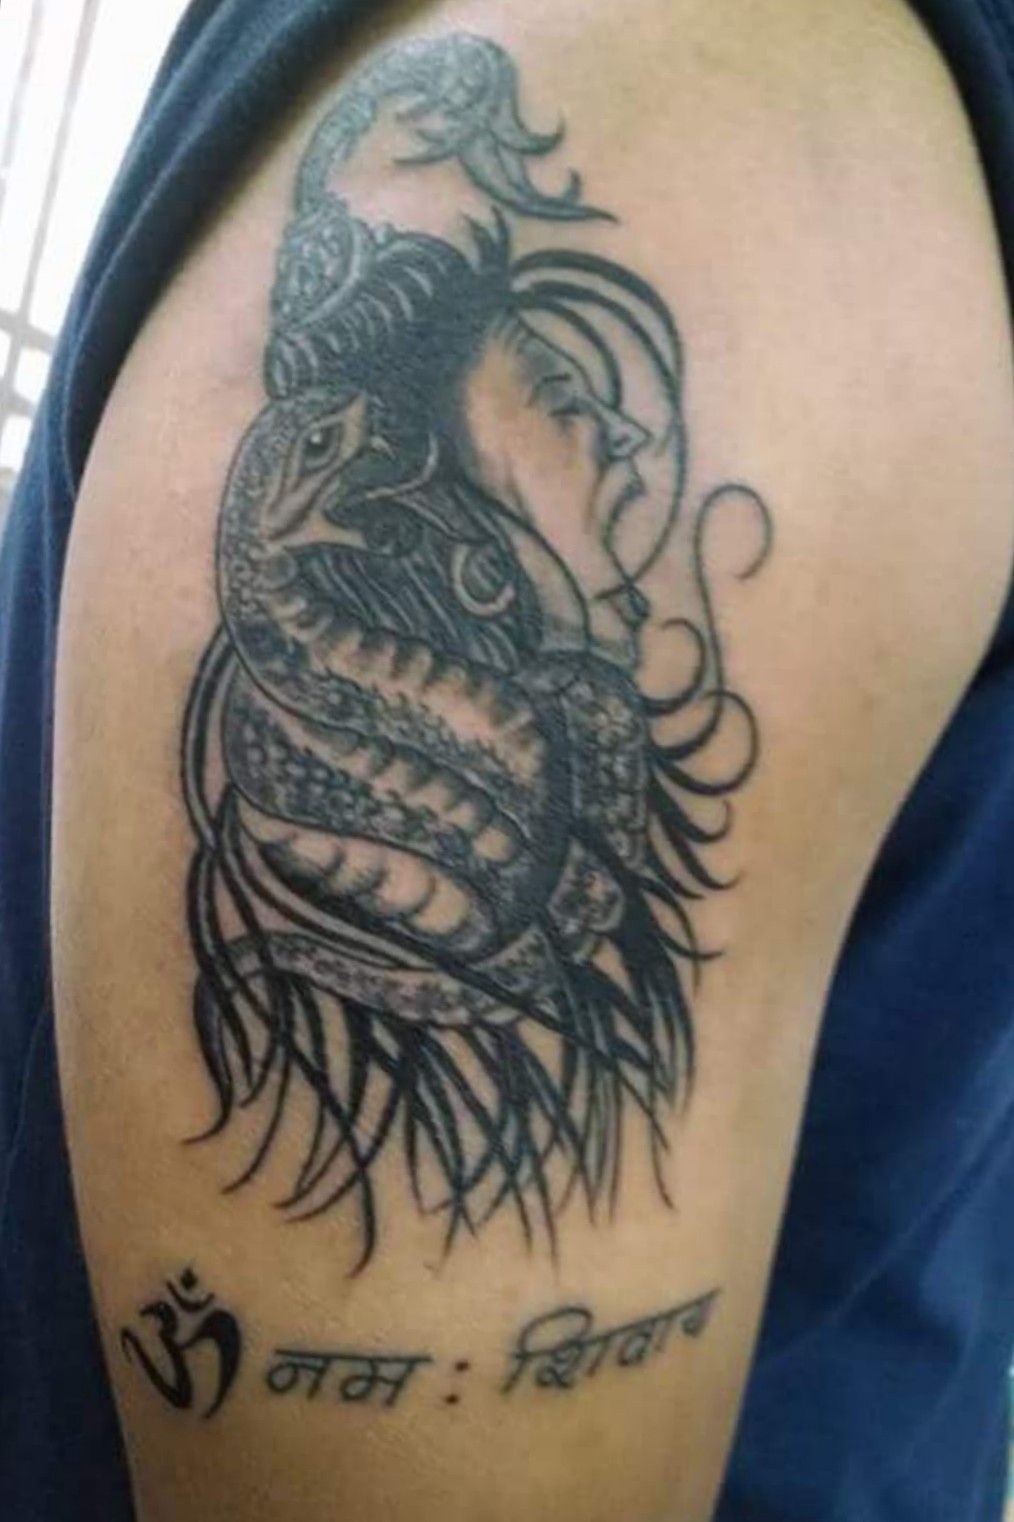 Discover 76+ about rudra shiva tattoo super cool .vn